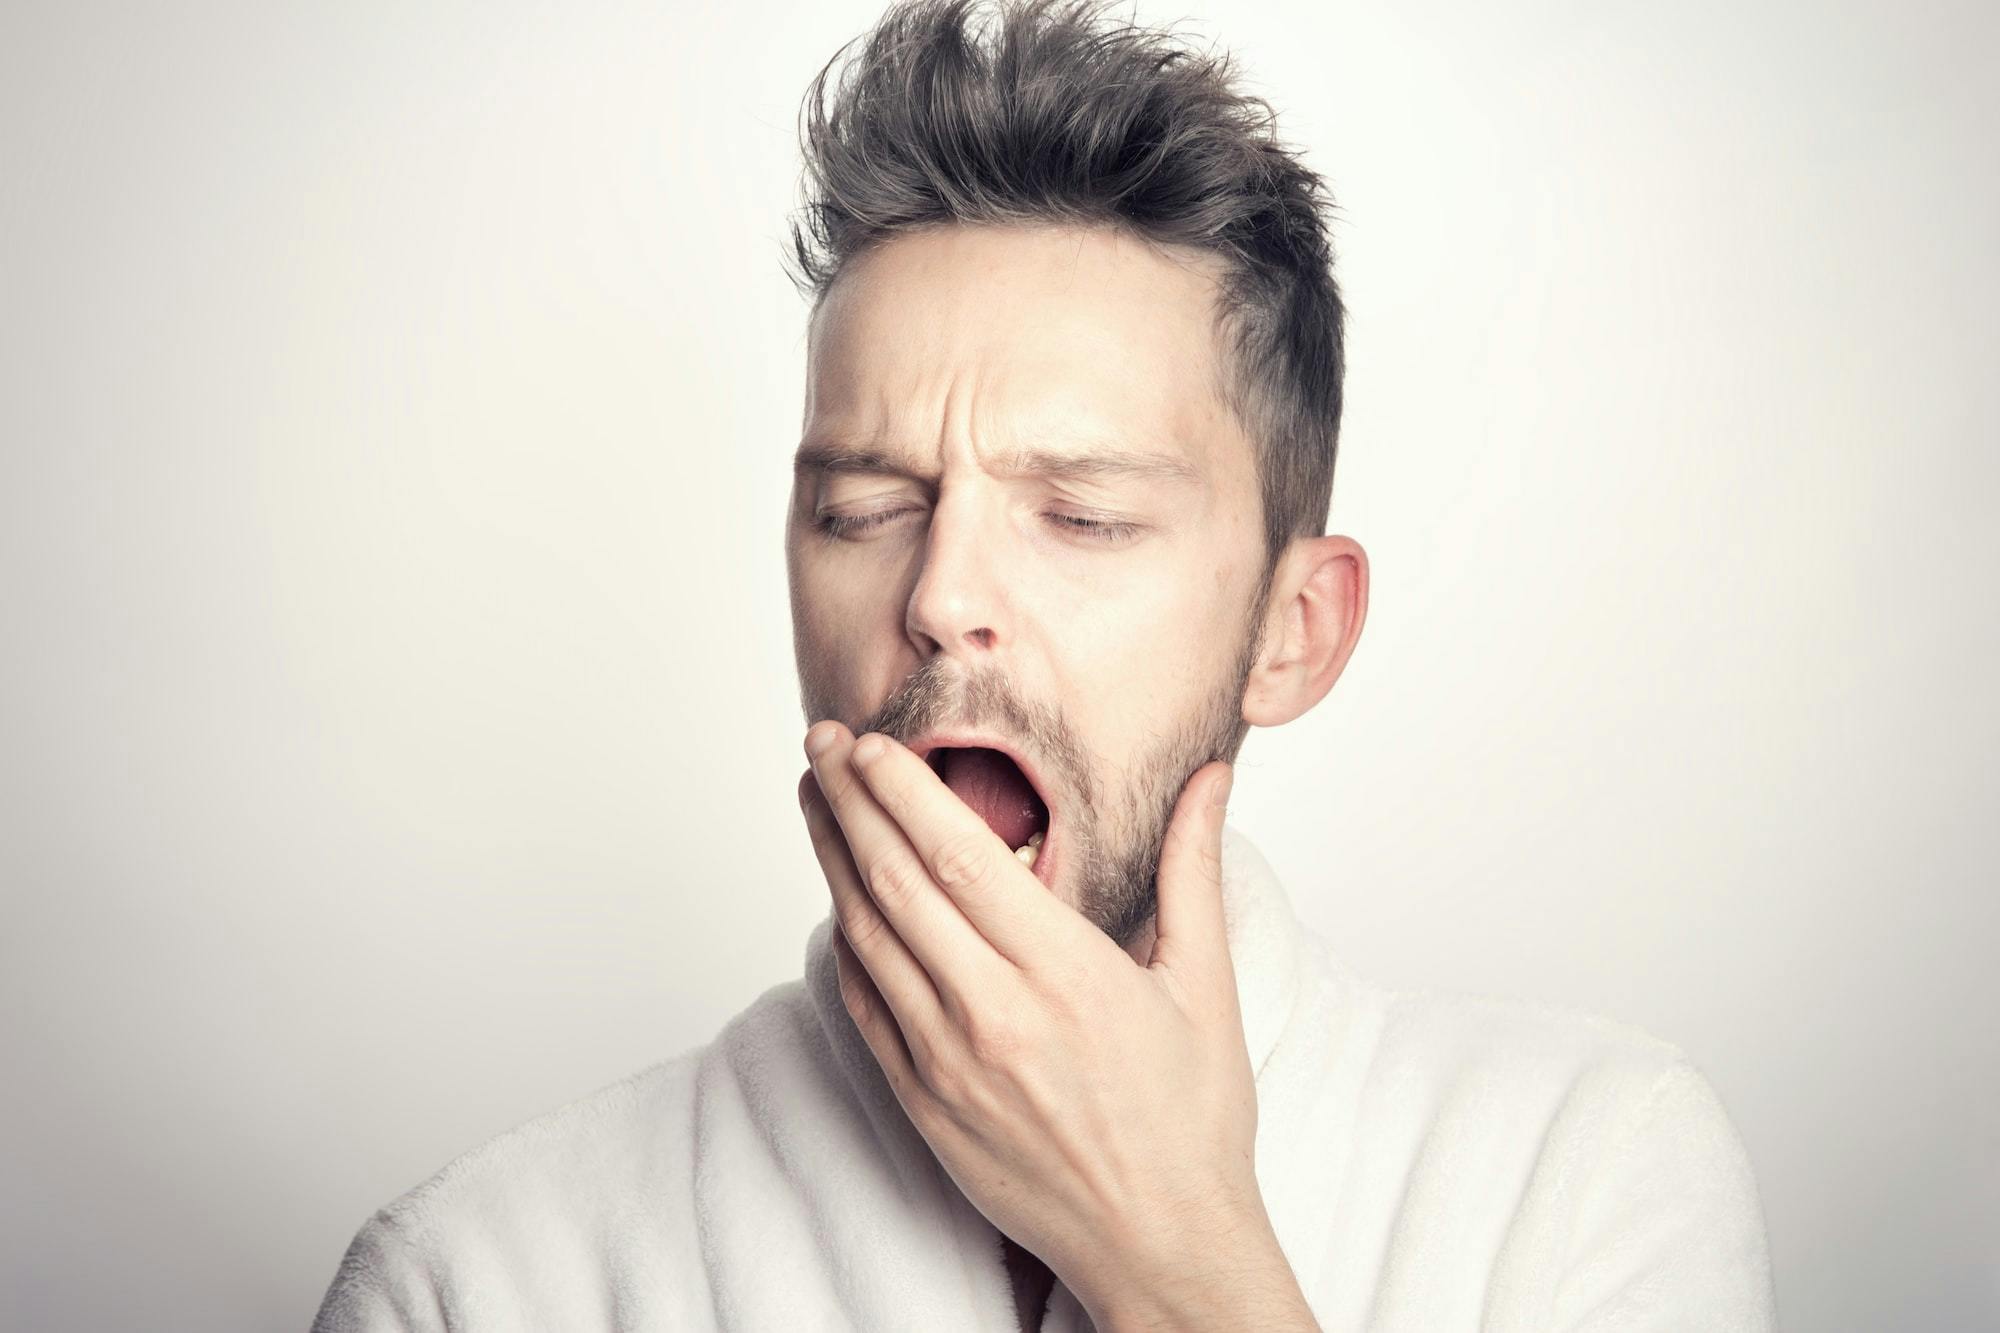 What is sleep apnea, what are the symptoms, and how to take action